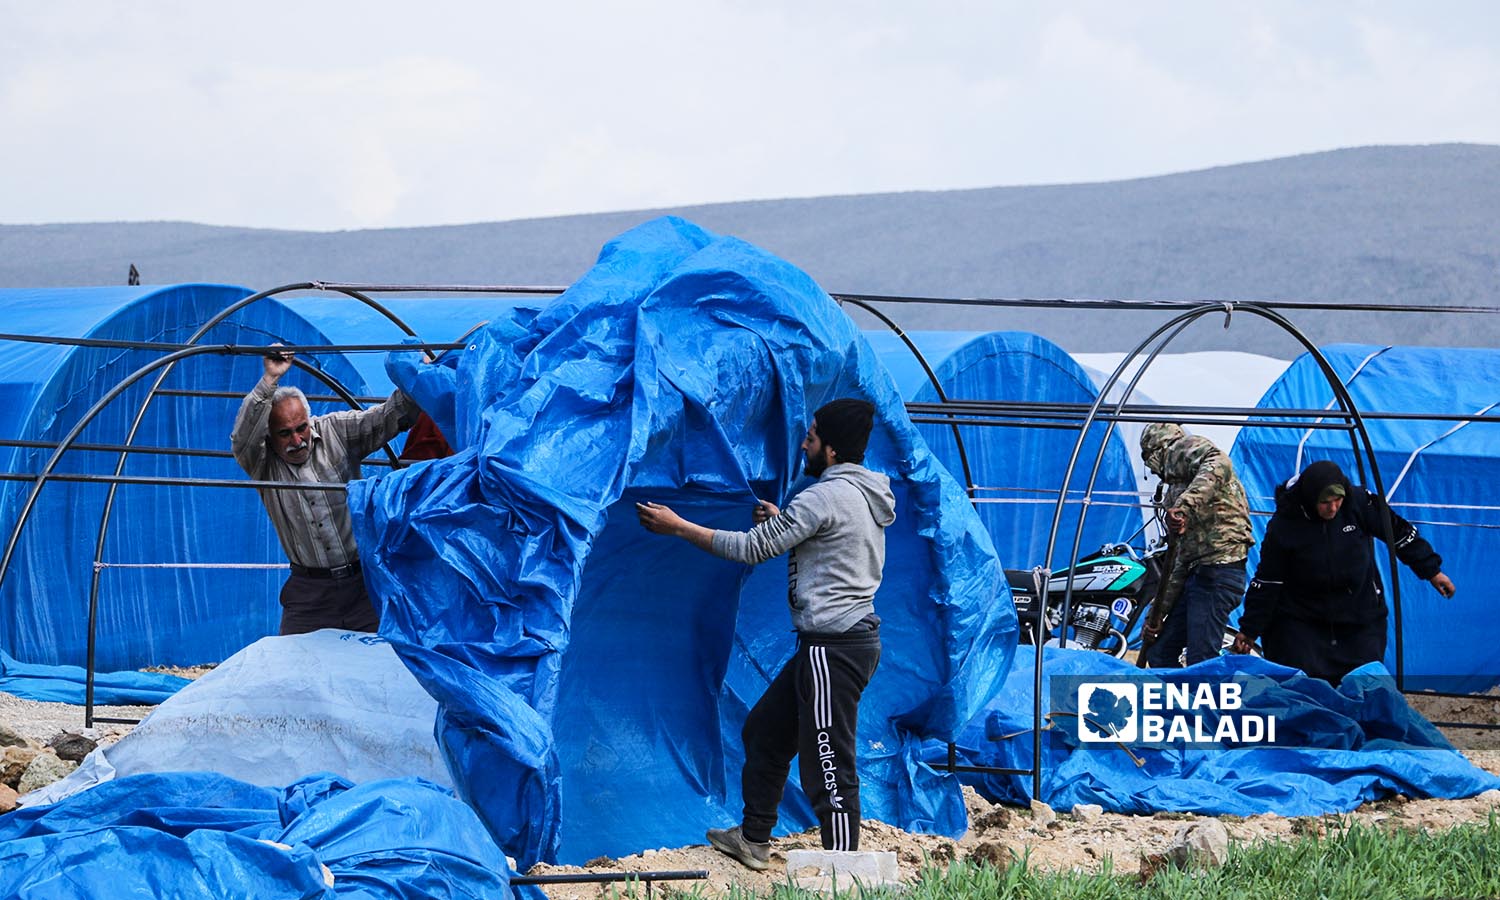 Displaced people trying to repair their tents after they were damaged by an air storm in Jisr al-Shughour region, west of Idlib - March 6, 2023 (Enab Baladi/Mohammad Nasan Dabel)